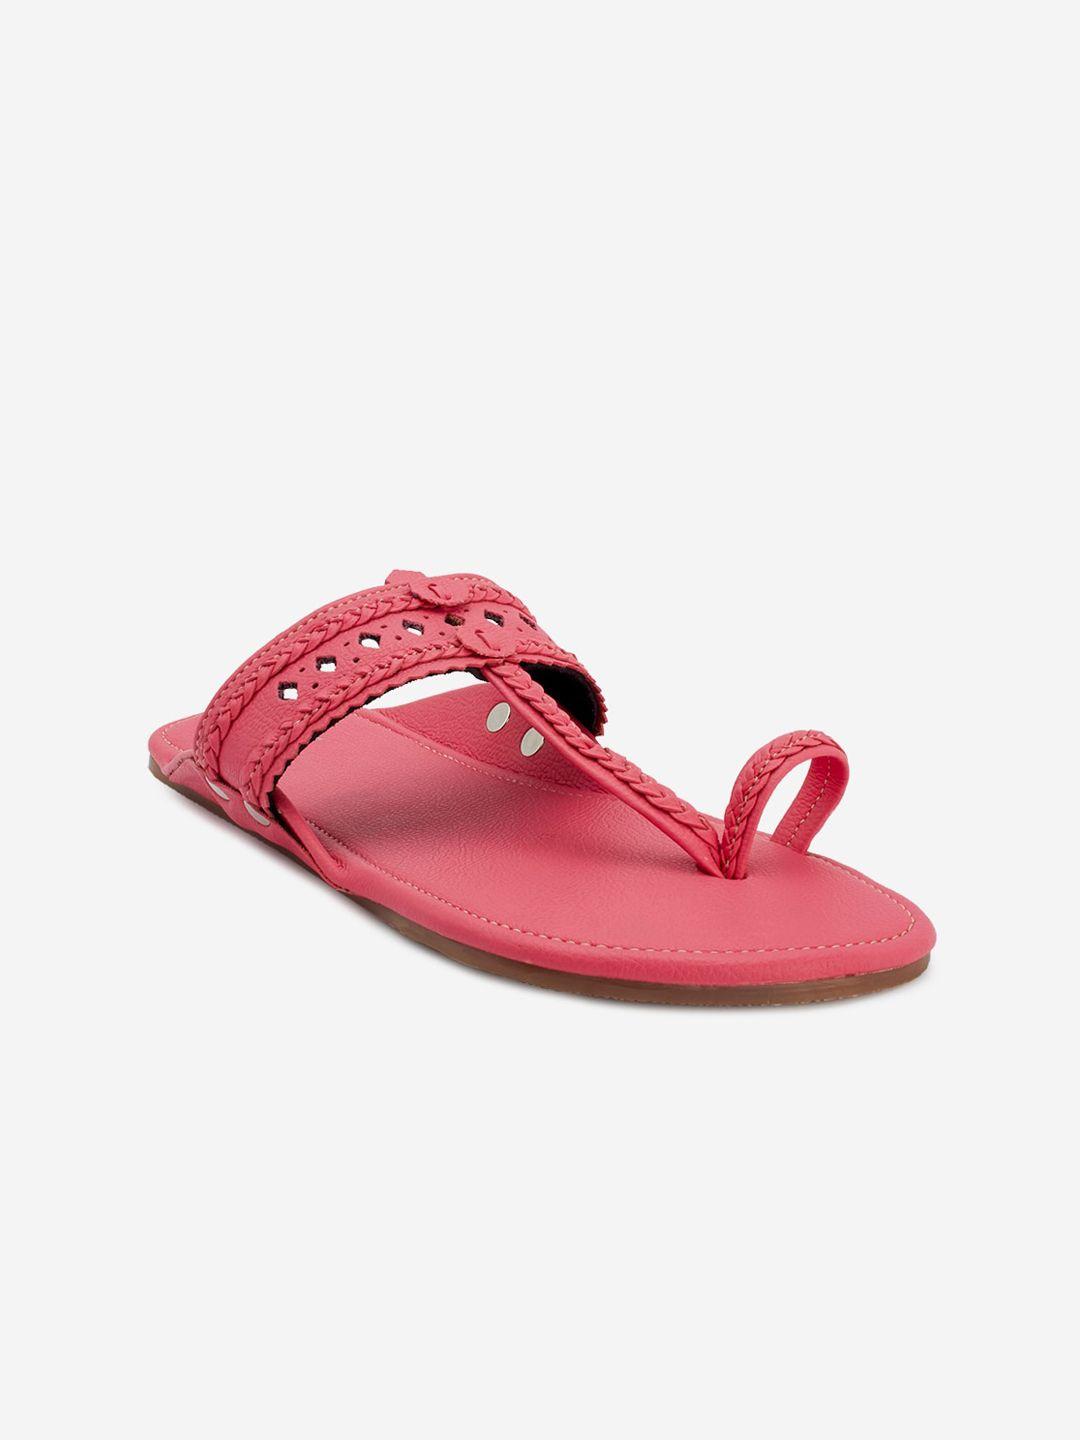 the madras trunk women pink one toe flats with laser cuts